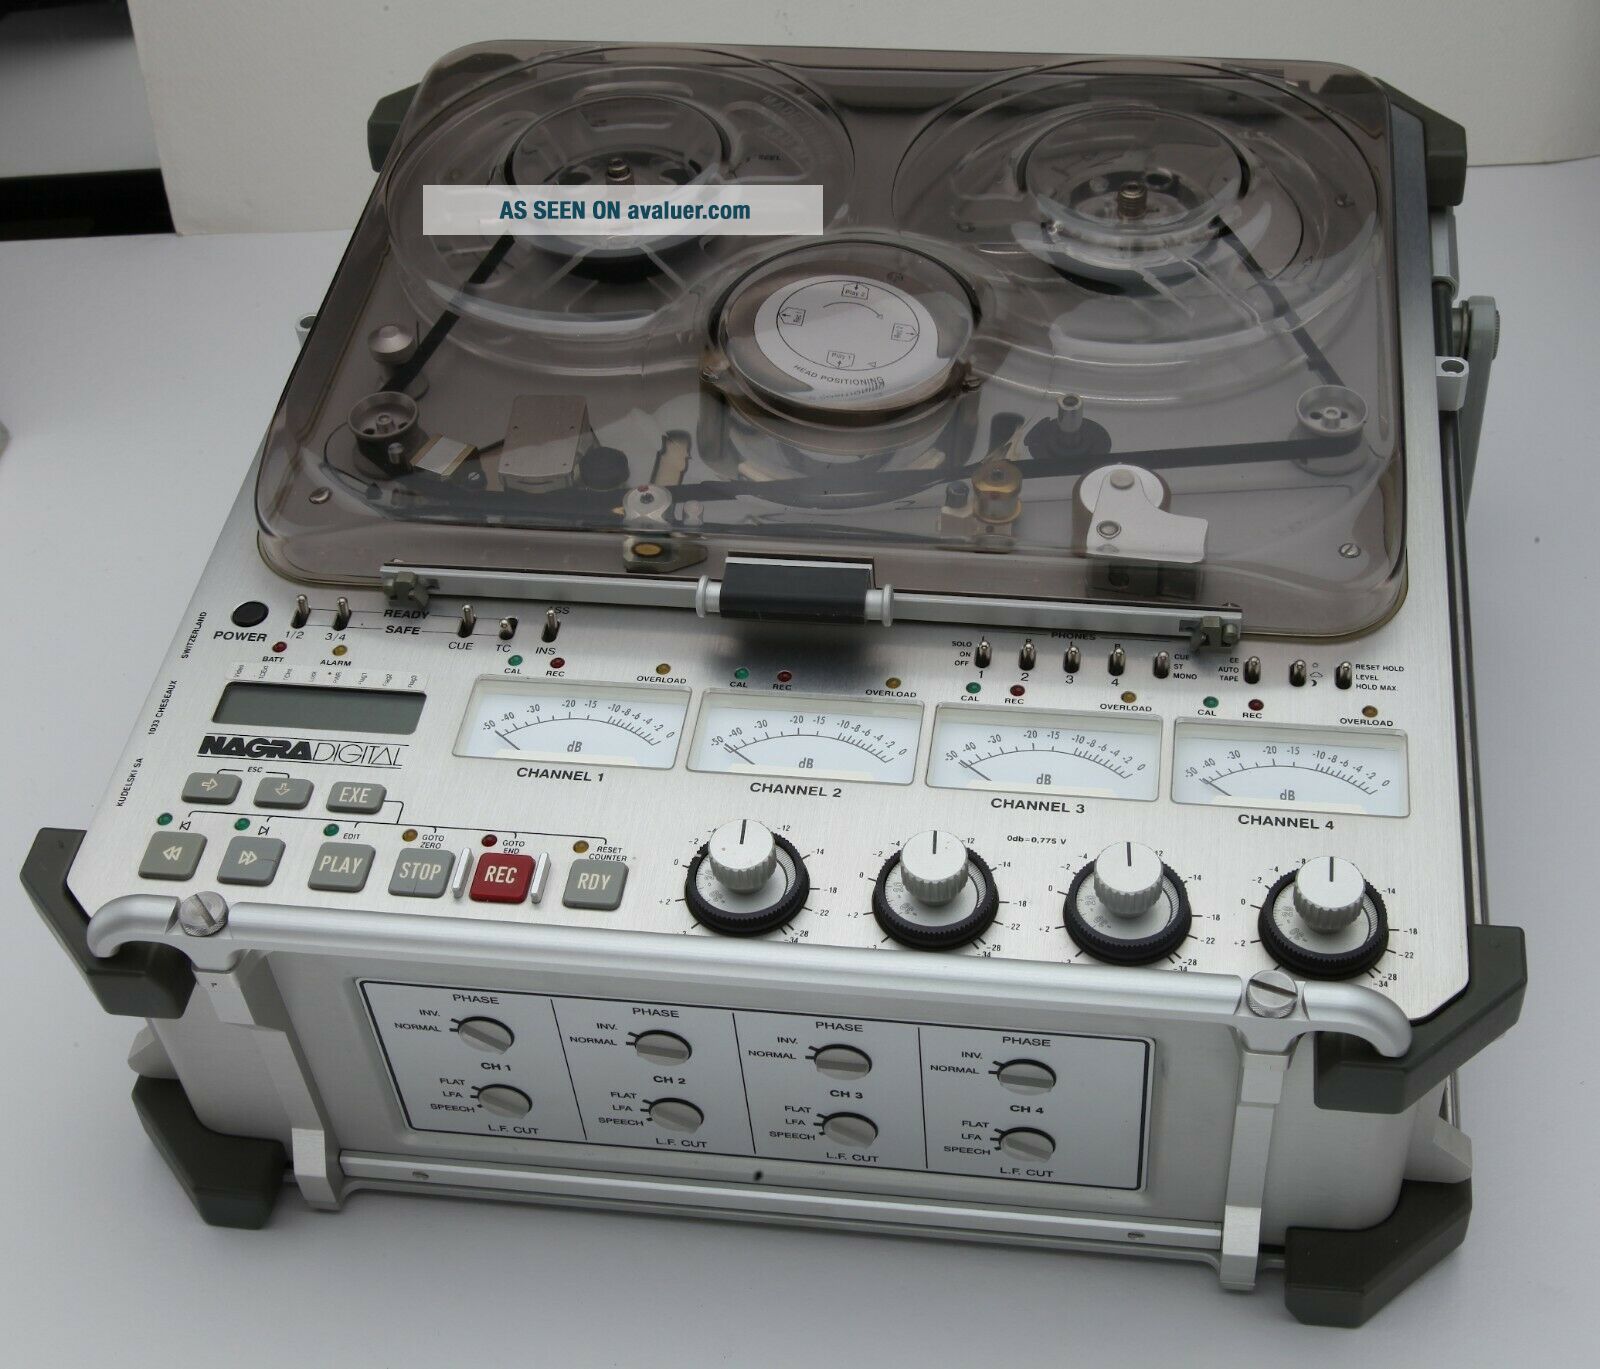 Nagra - D 4 Channel Digital Audio Recorder plus accessories,  very of use